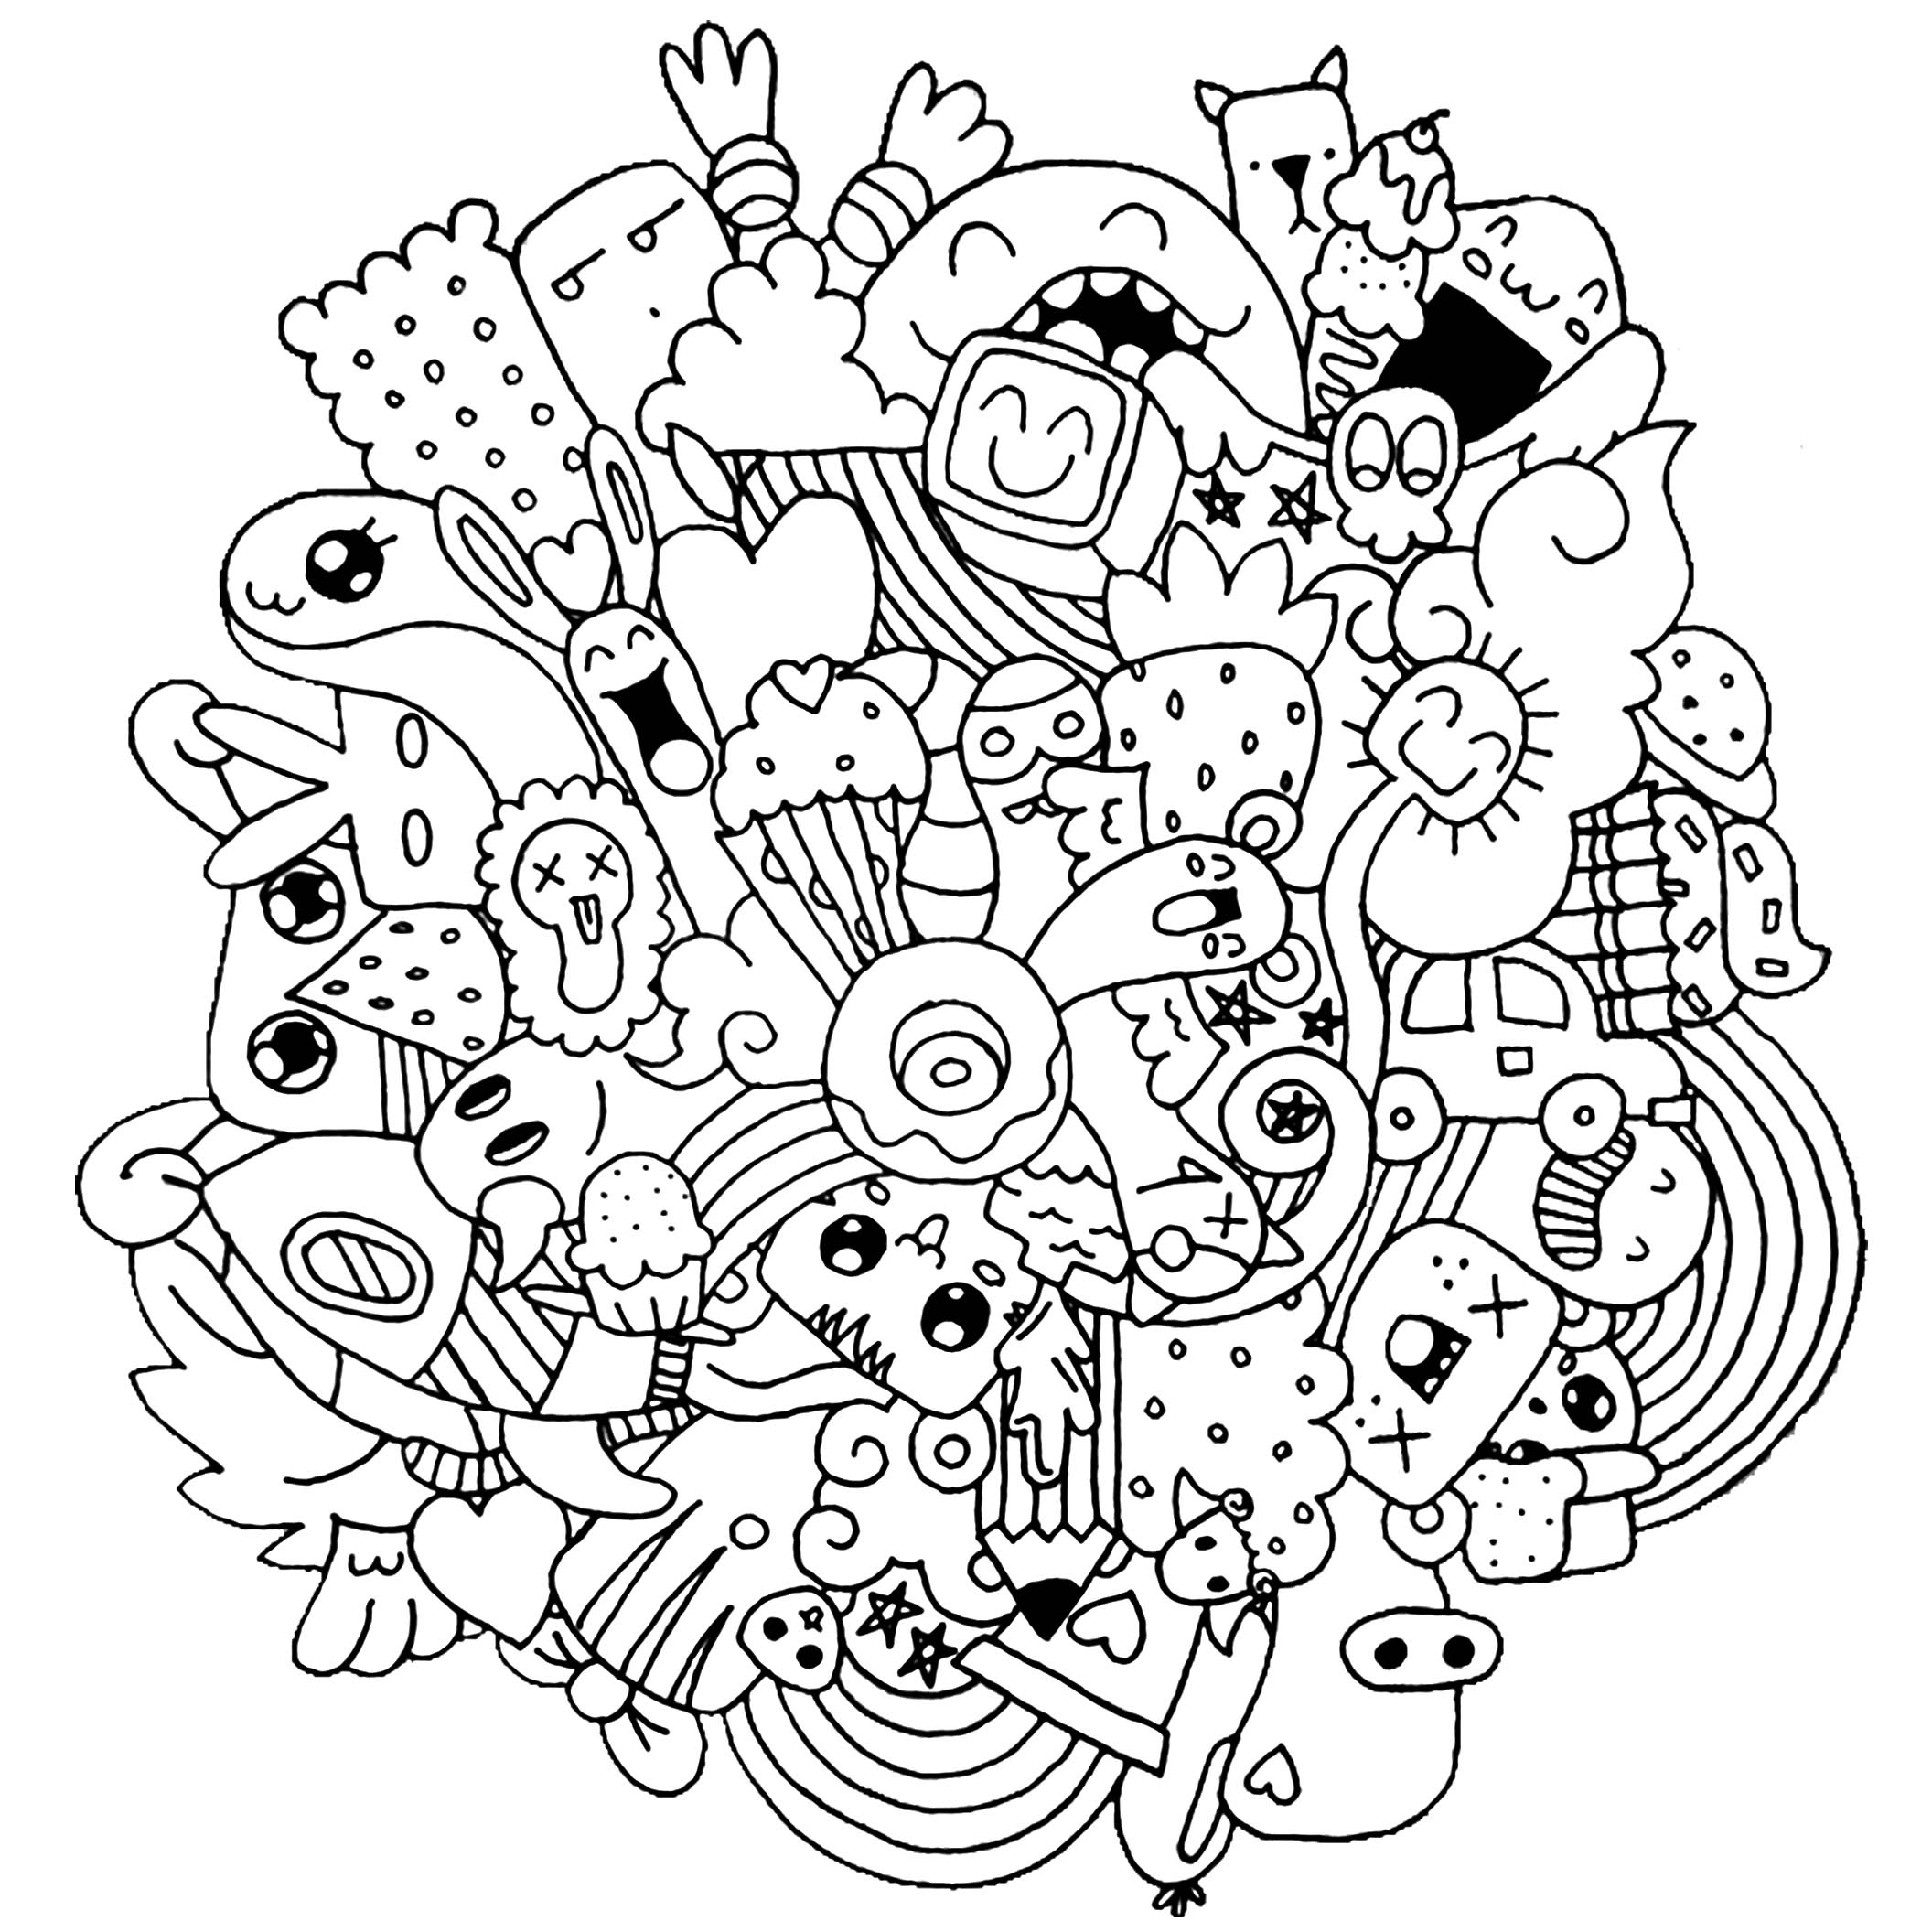 It's up to you to choose the best colors for this crazy Doodle!, Artist : Lucie